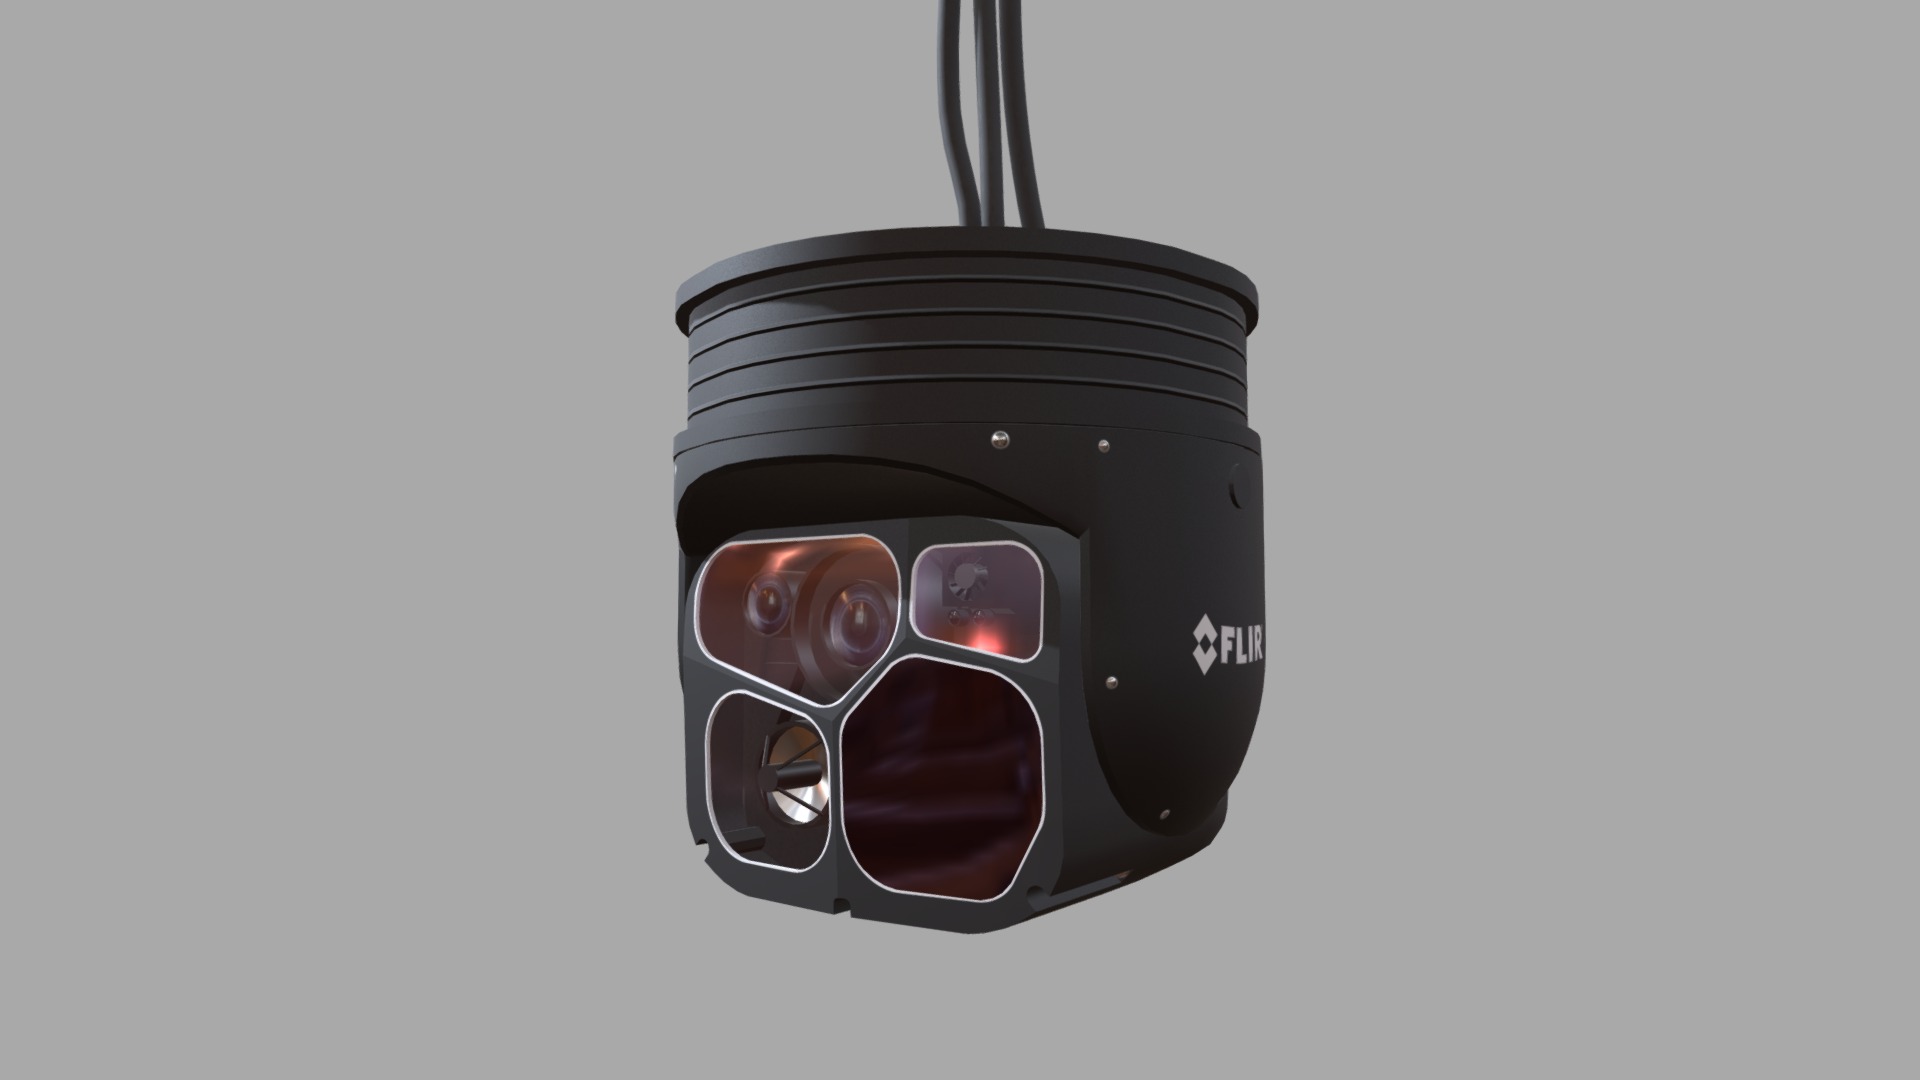 3D model FLIR Star SAFIRE 380 HDc - This is a 3D model of the FLIR Star SAFIRE 380 HDc. The 3D model is about a camera on a chain.